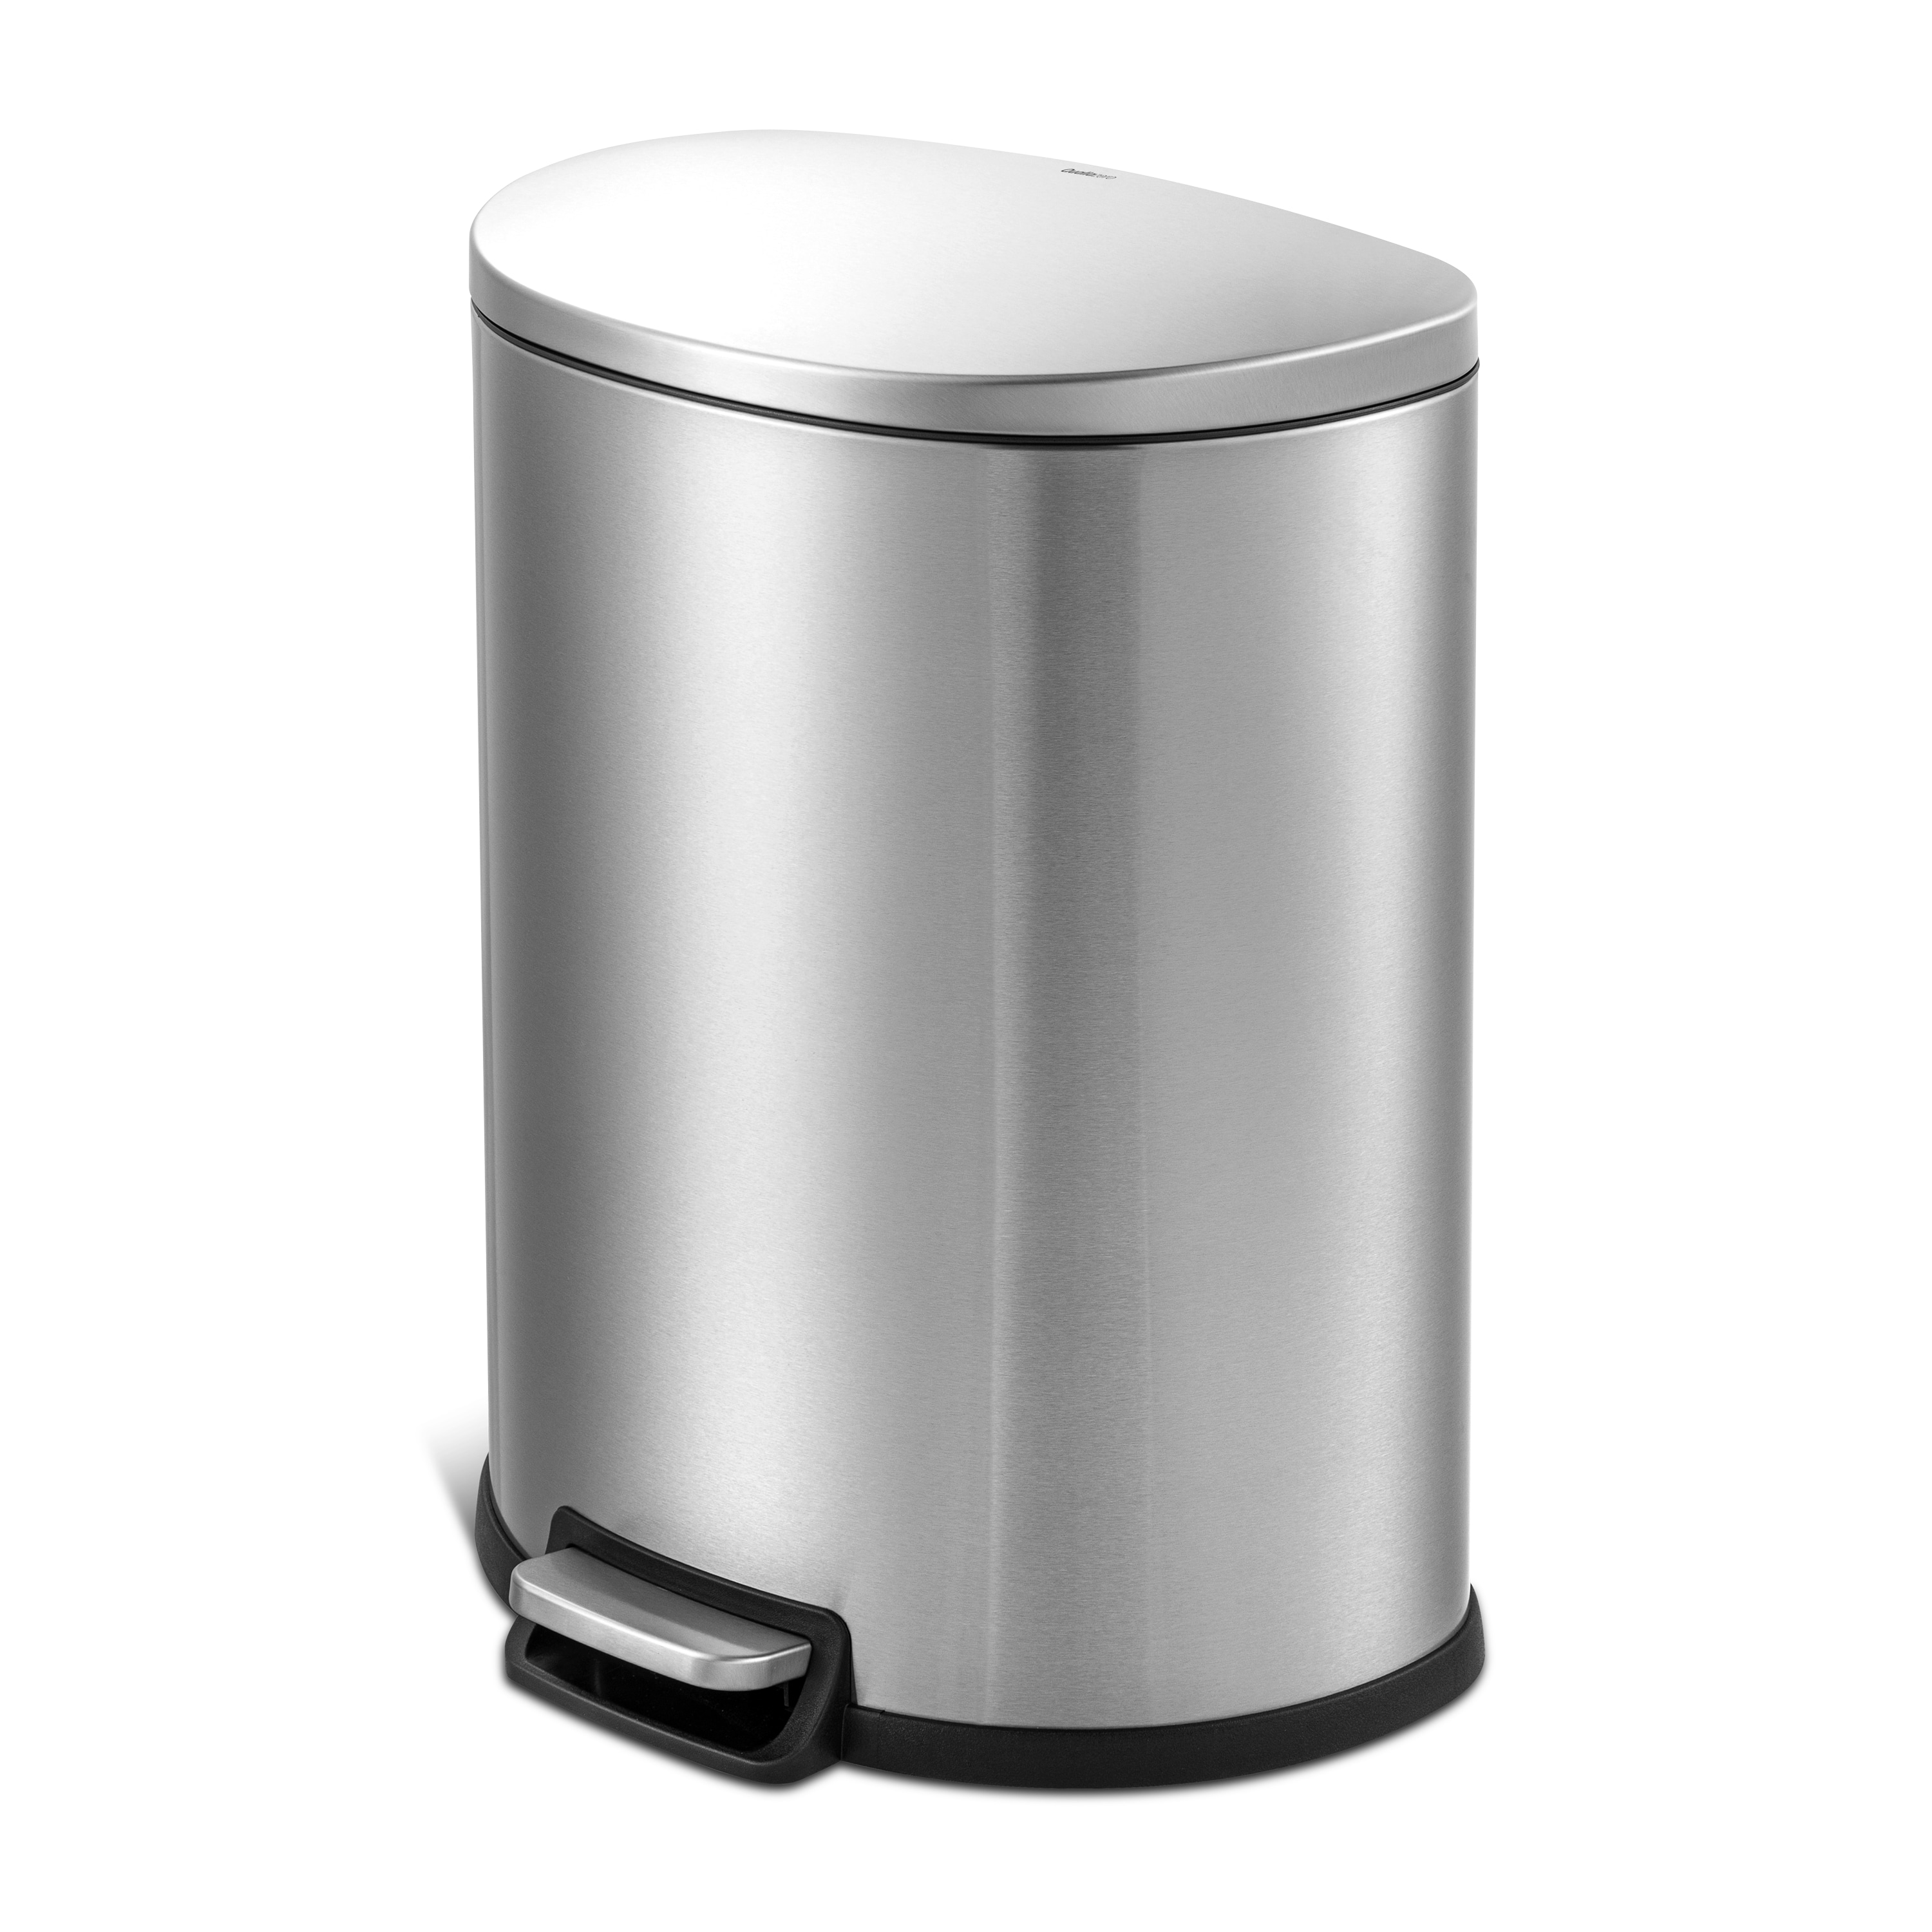 14.5 Gallon Trash Can Stainless Steel Semi-Round Kitchen Trash Can - Silver